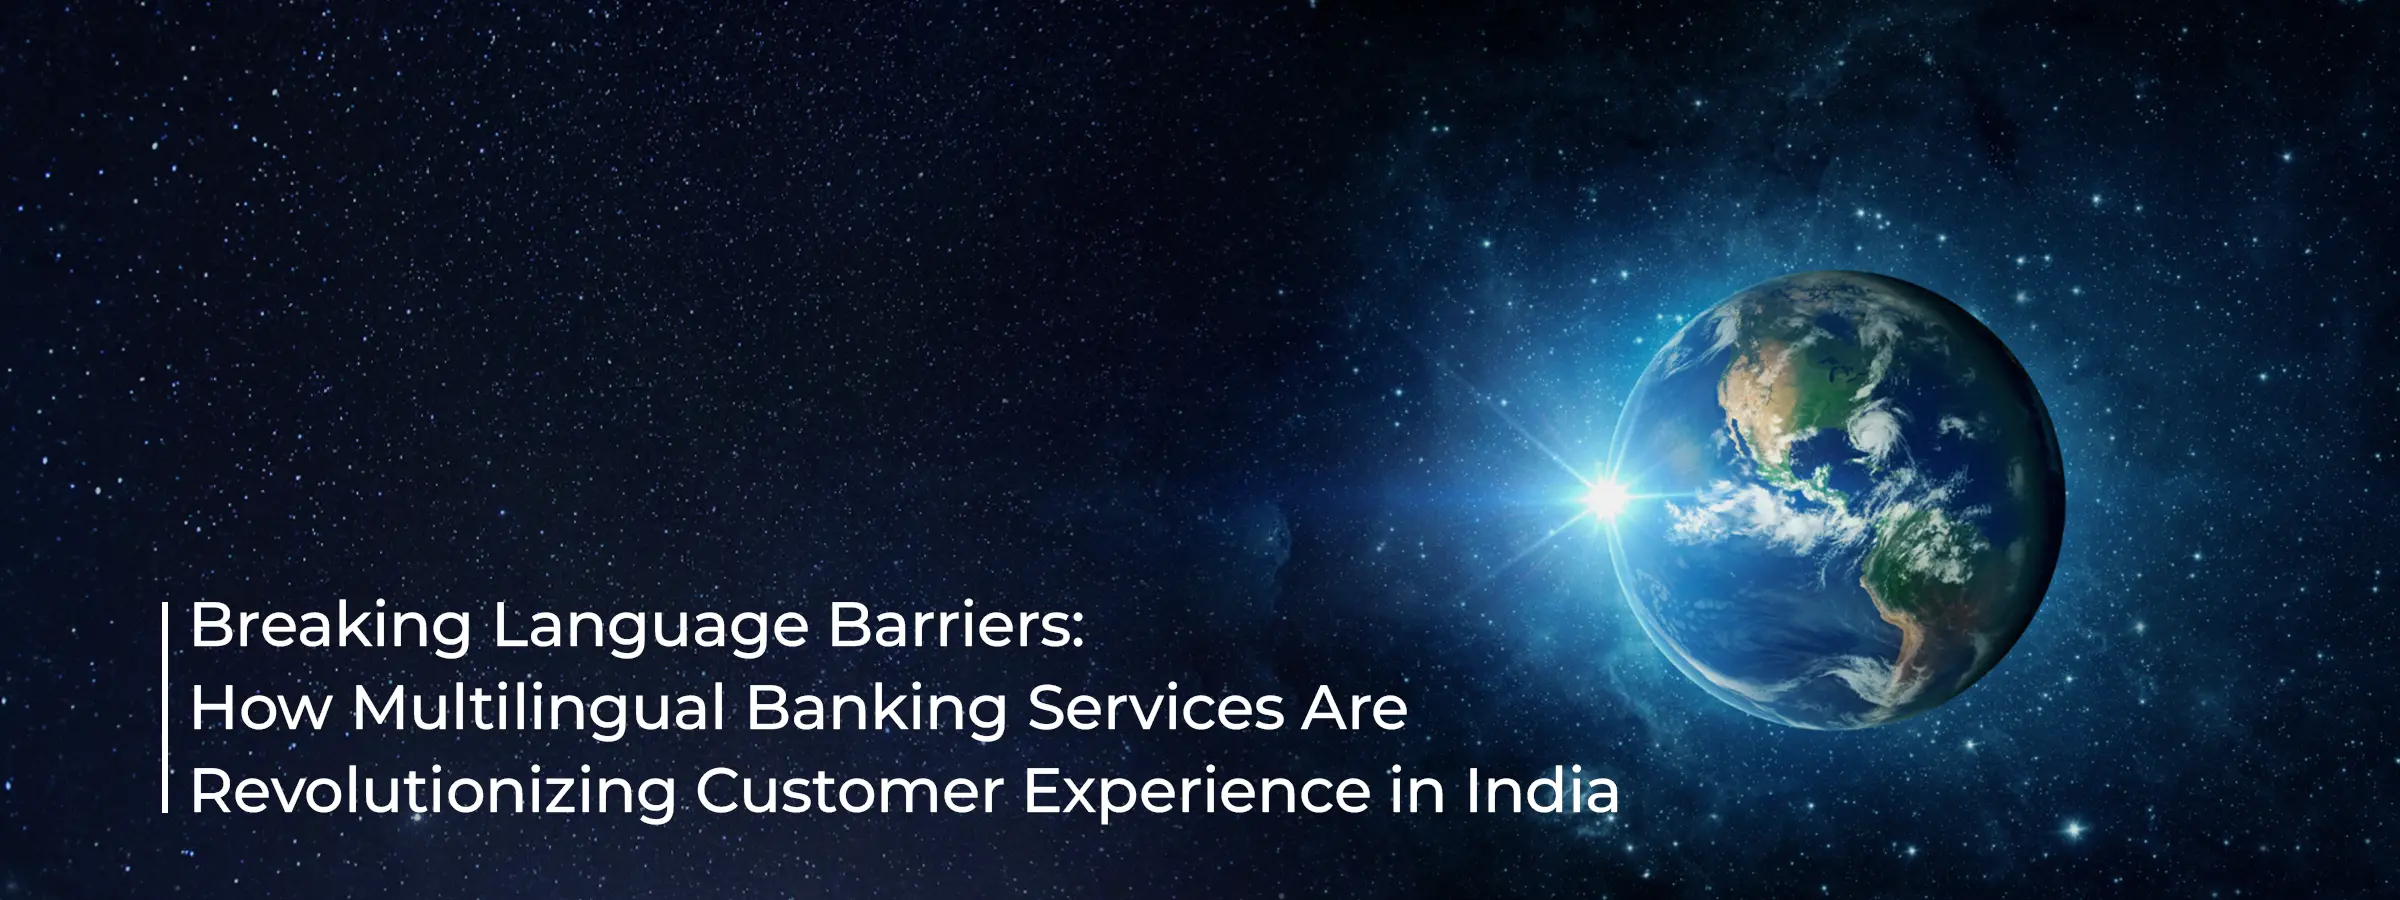 multilingual-banking-services-are-revolutionizing-customer-experience-in-india